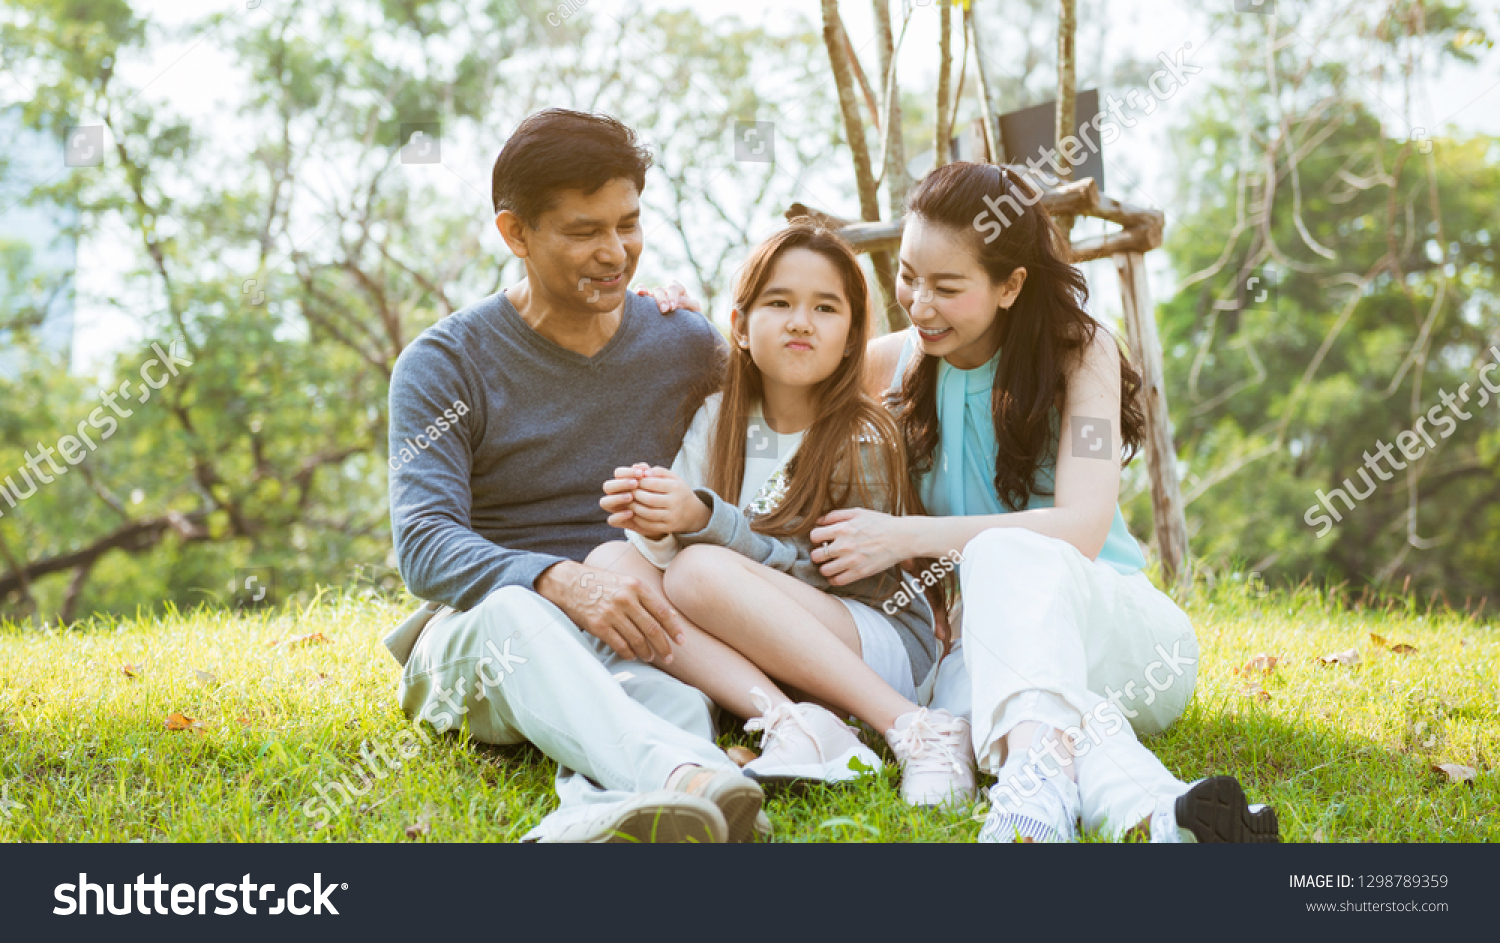 Happy parents and daughter having fun in the park #1298789359